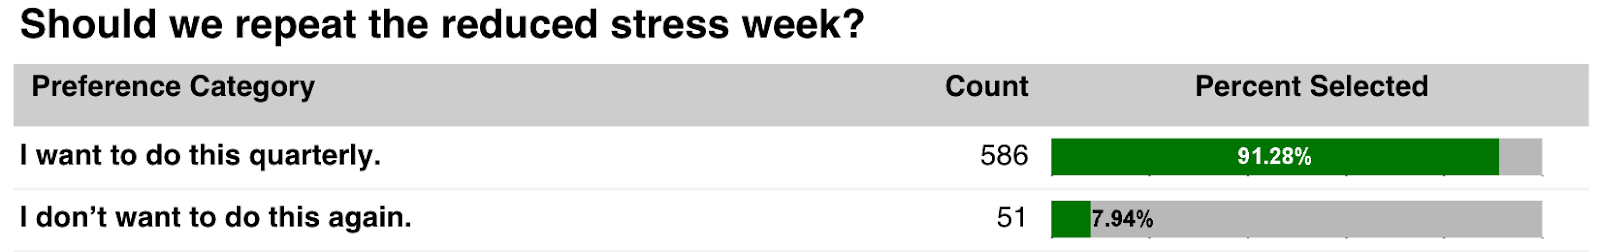 Redfin's reduced stress survey: Should we repeat the reduced stress week?